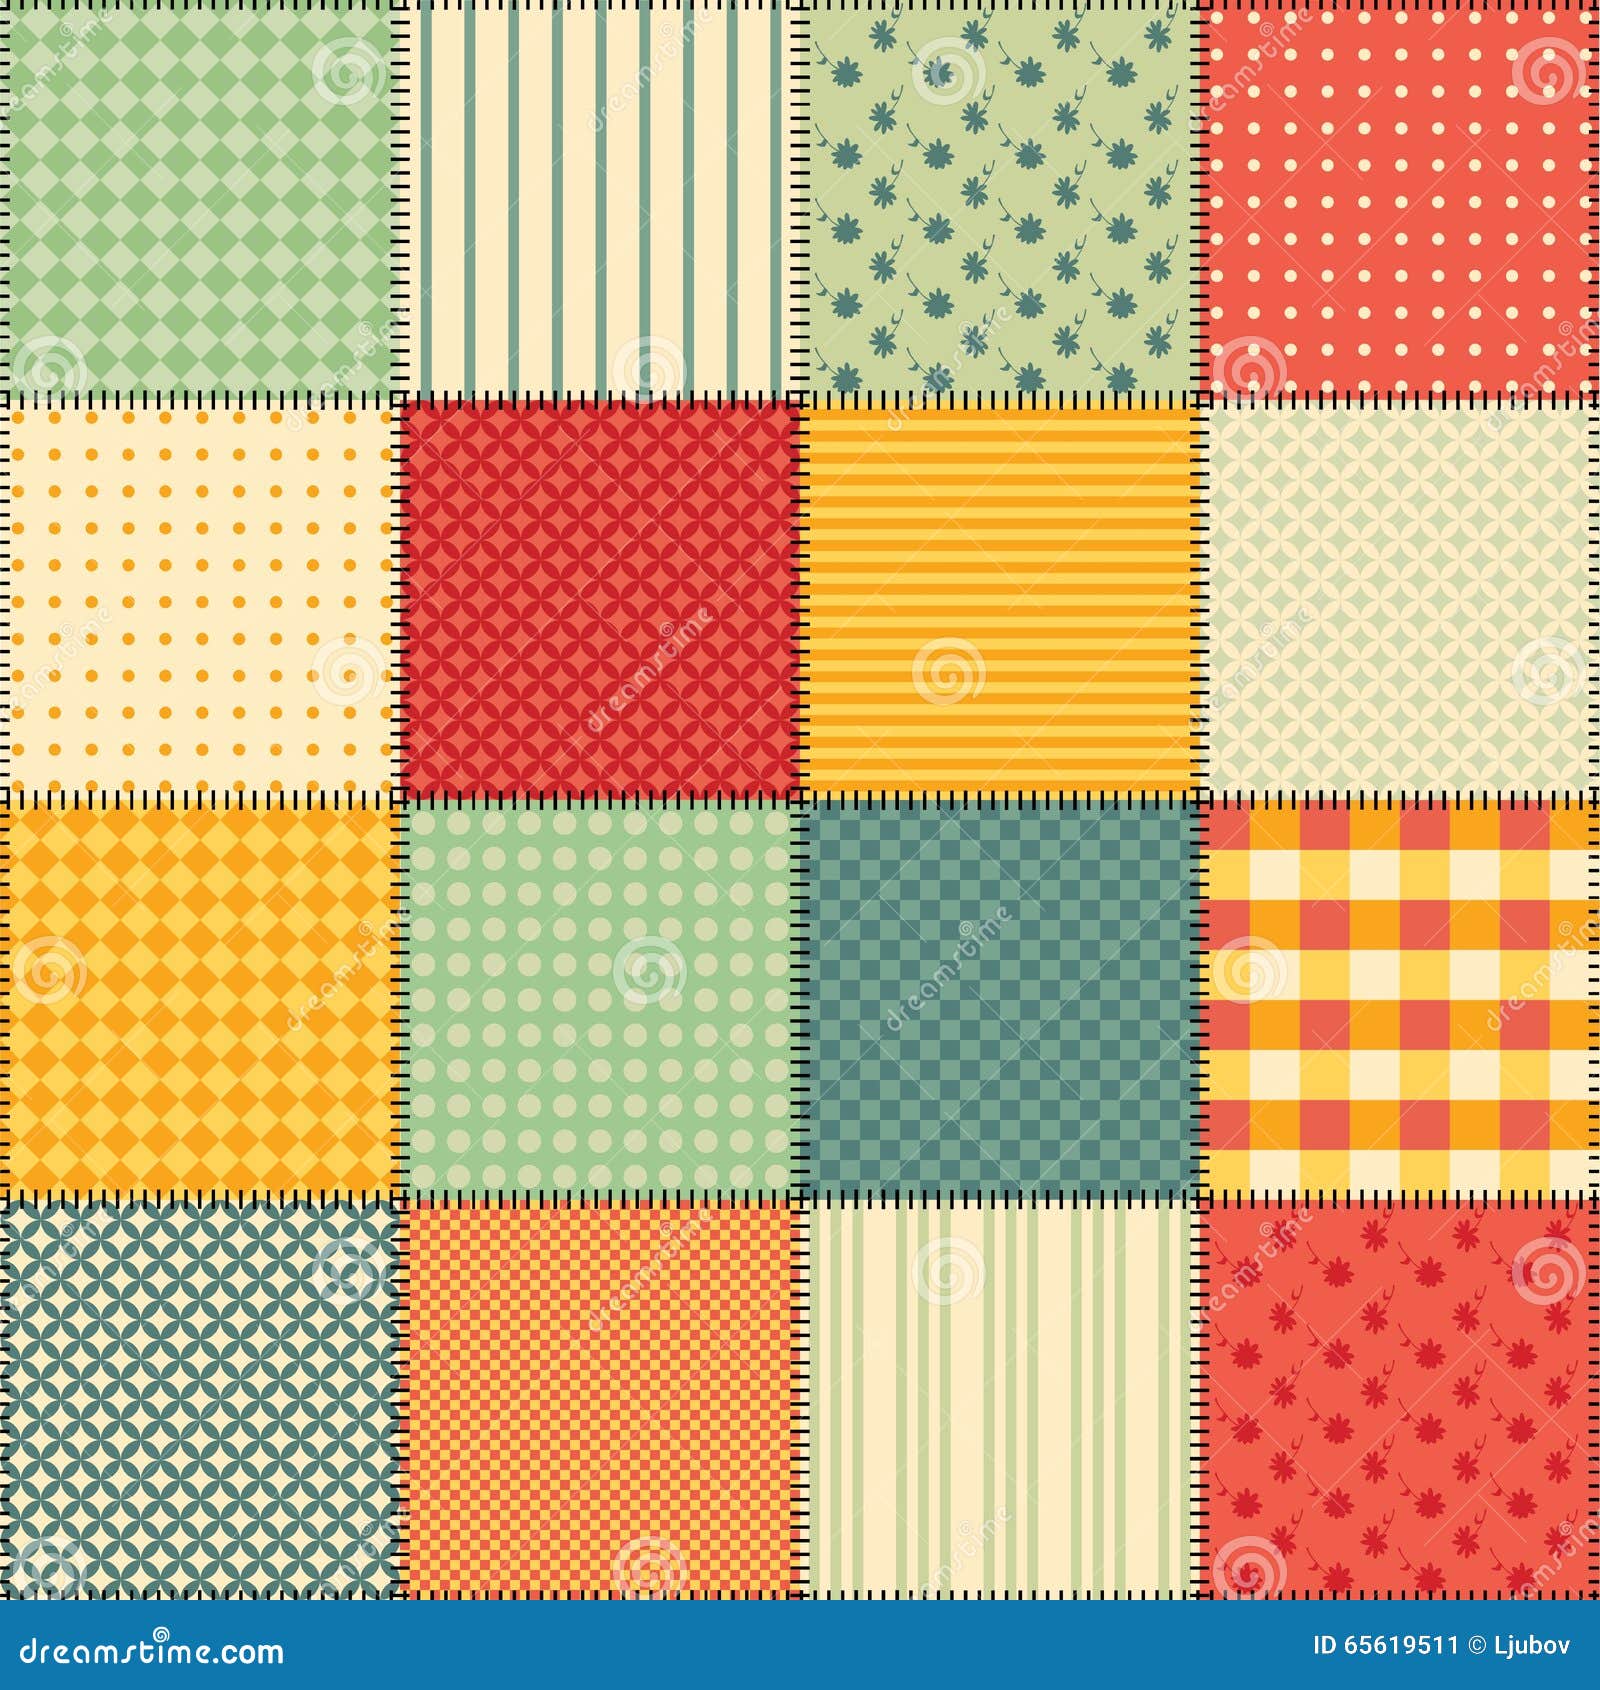 bright seamless patchwork background with different patterns.